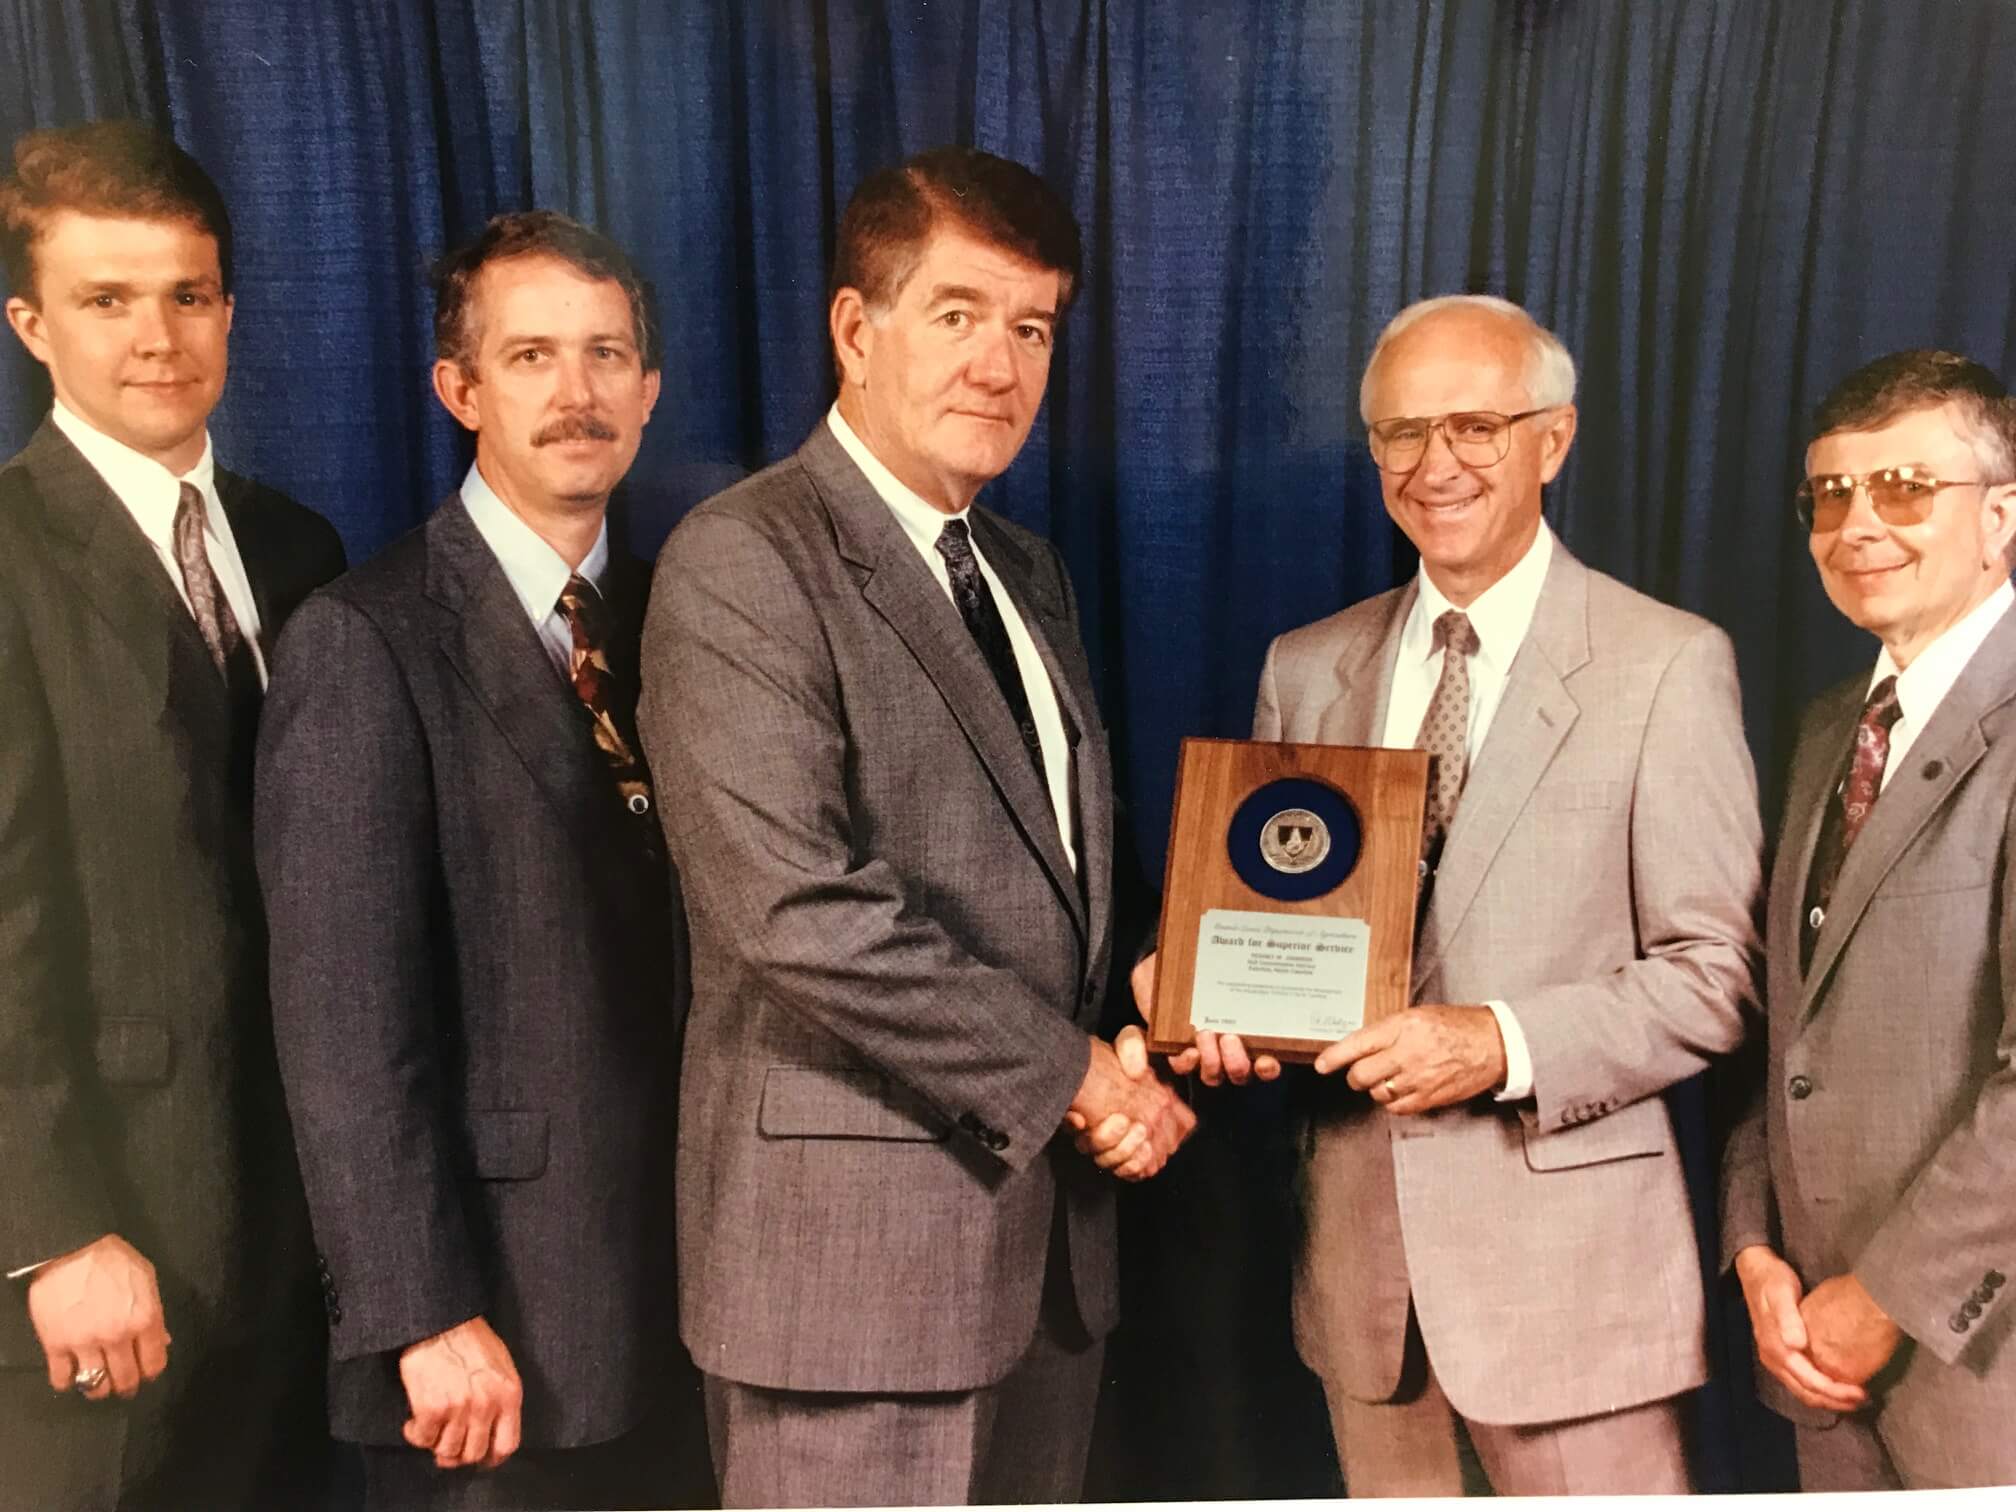 (From left to right, Jay Akridge, Terry Stewart, Secretary of Agriculture Edward Madigan, Max Judge and John Forrest in Washington D.C. 1992)